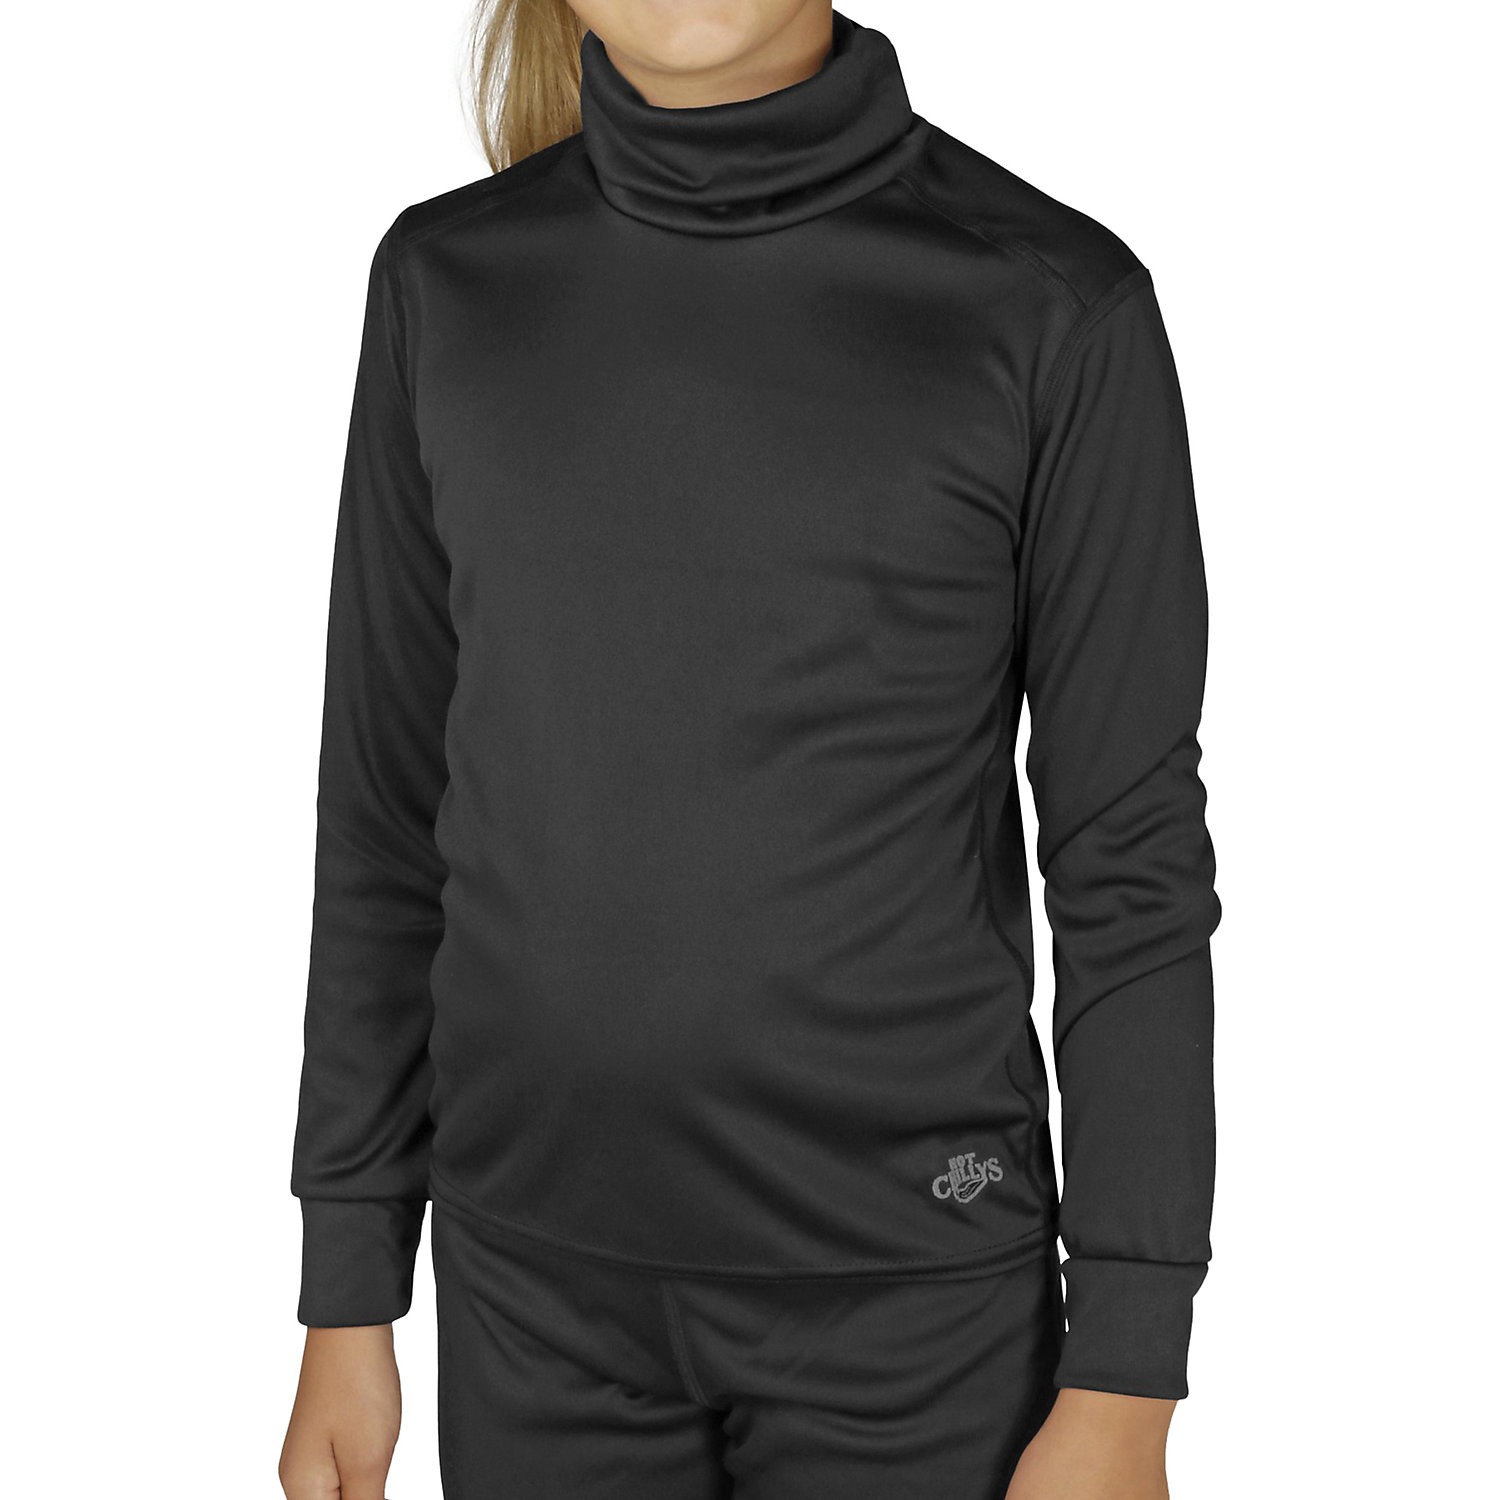 Hot Chillys Youth Peachskins Turtleneck Top